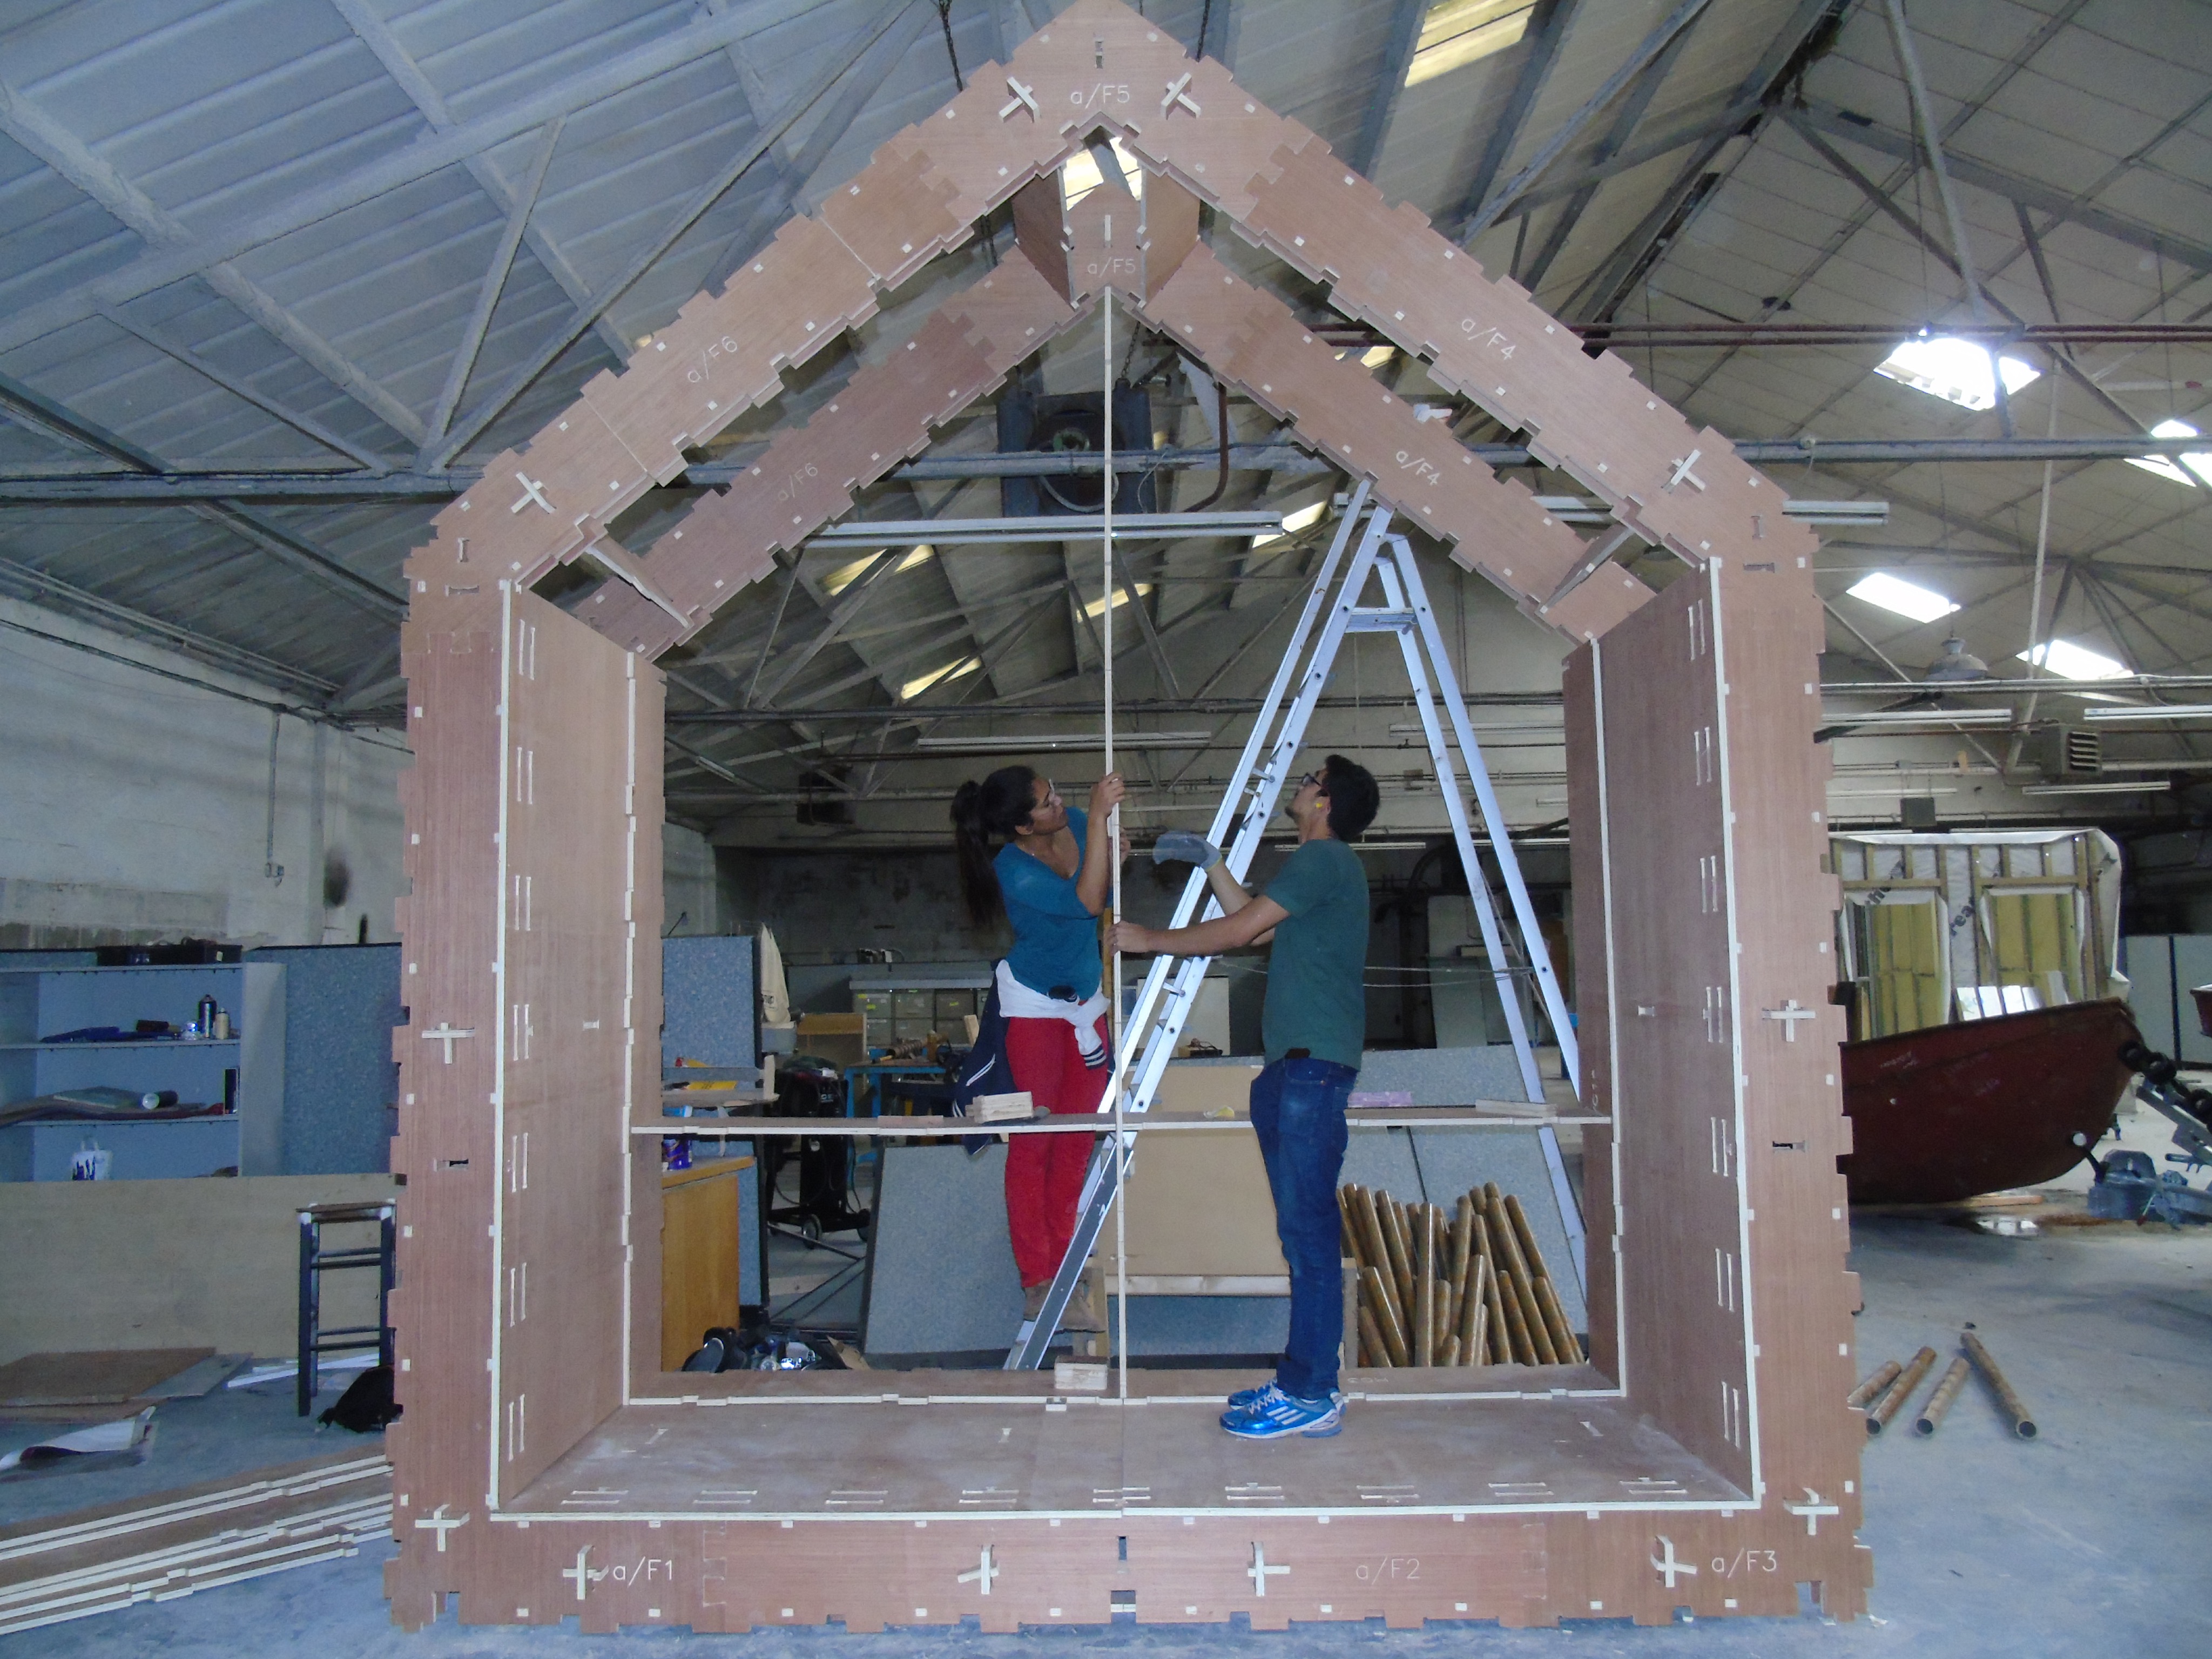 WikiHouse